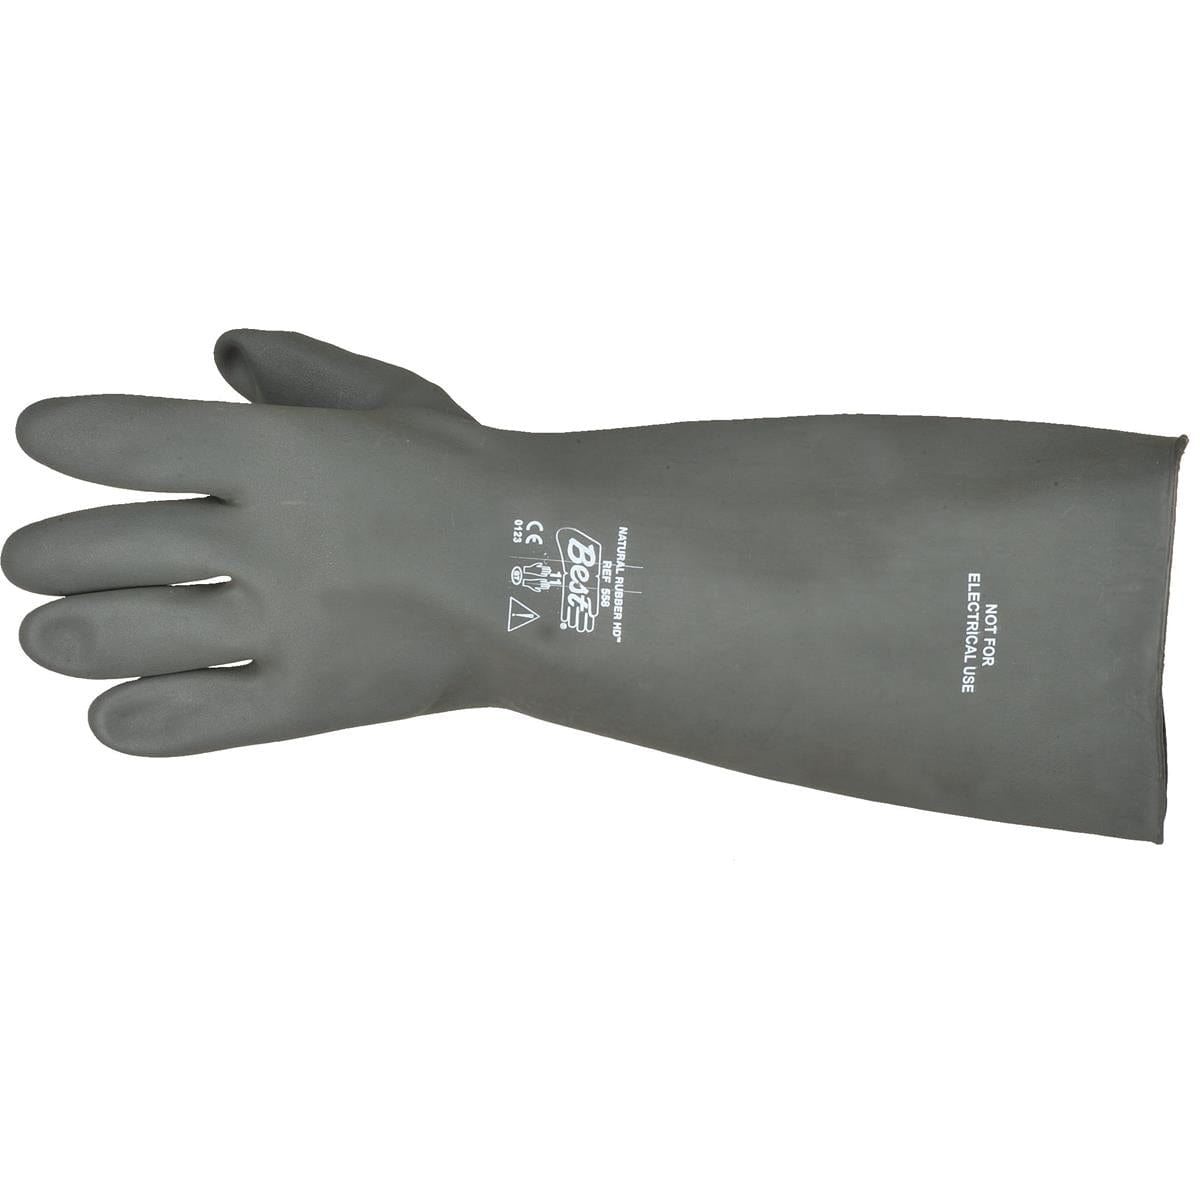 SHOWA BEST Unlined, Natural Rubber Latex HD™ Safety Gloves